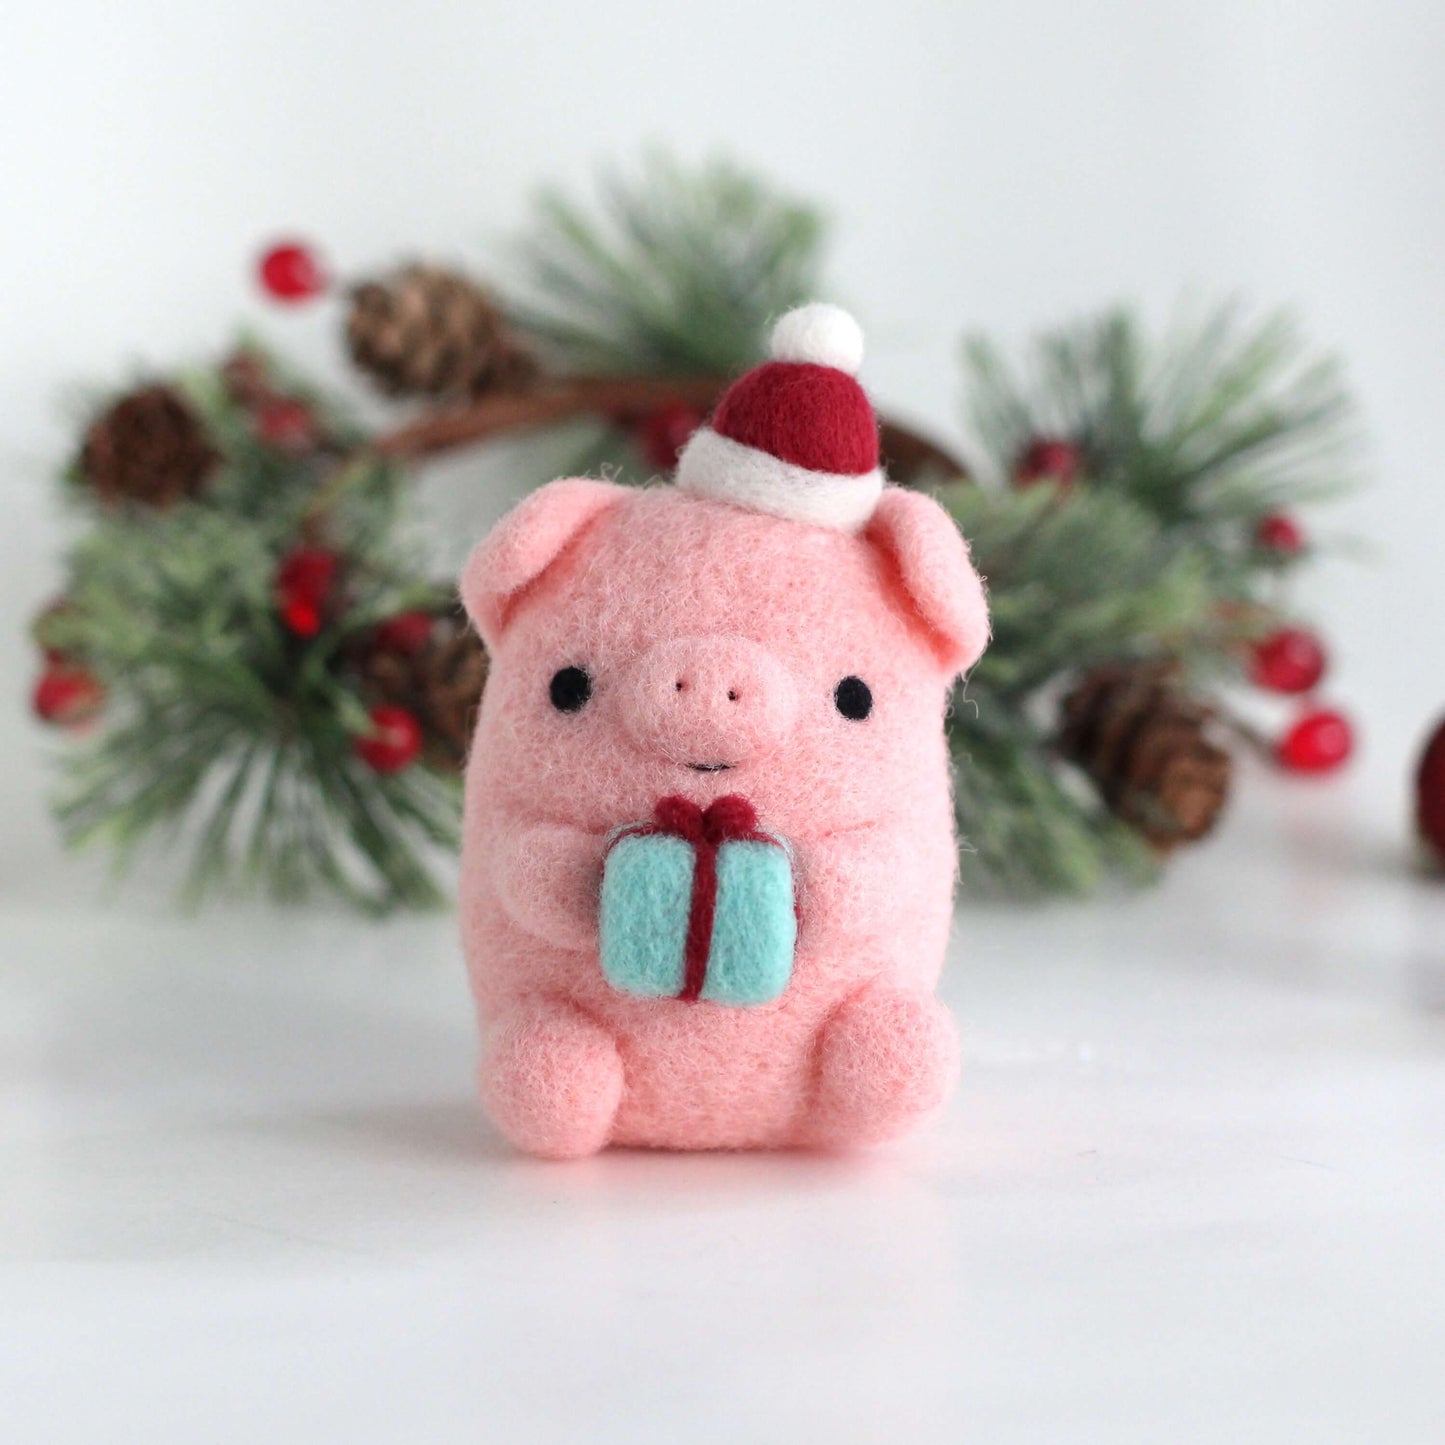 Needle Felted Pig w/ Christmas Present by Wild Whimsy Woolies